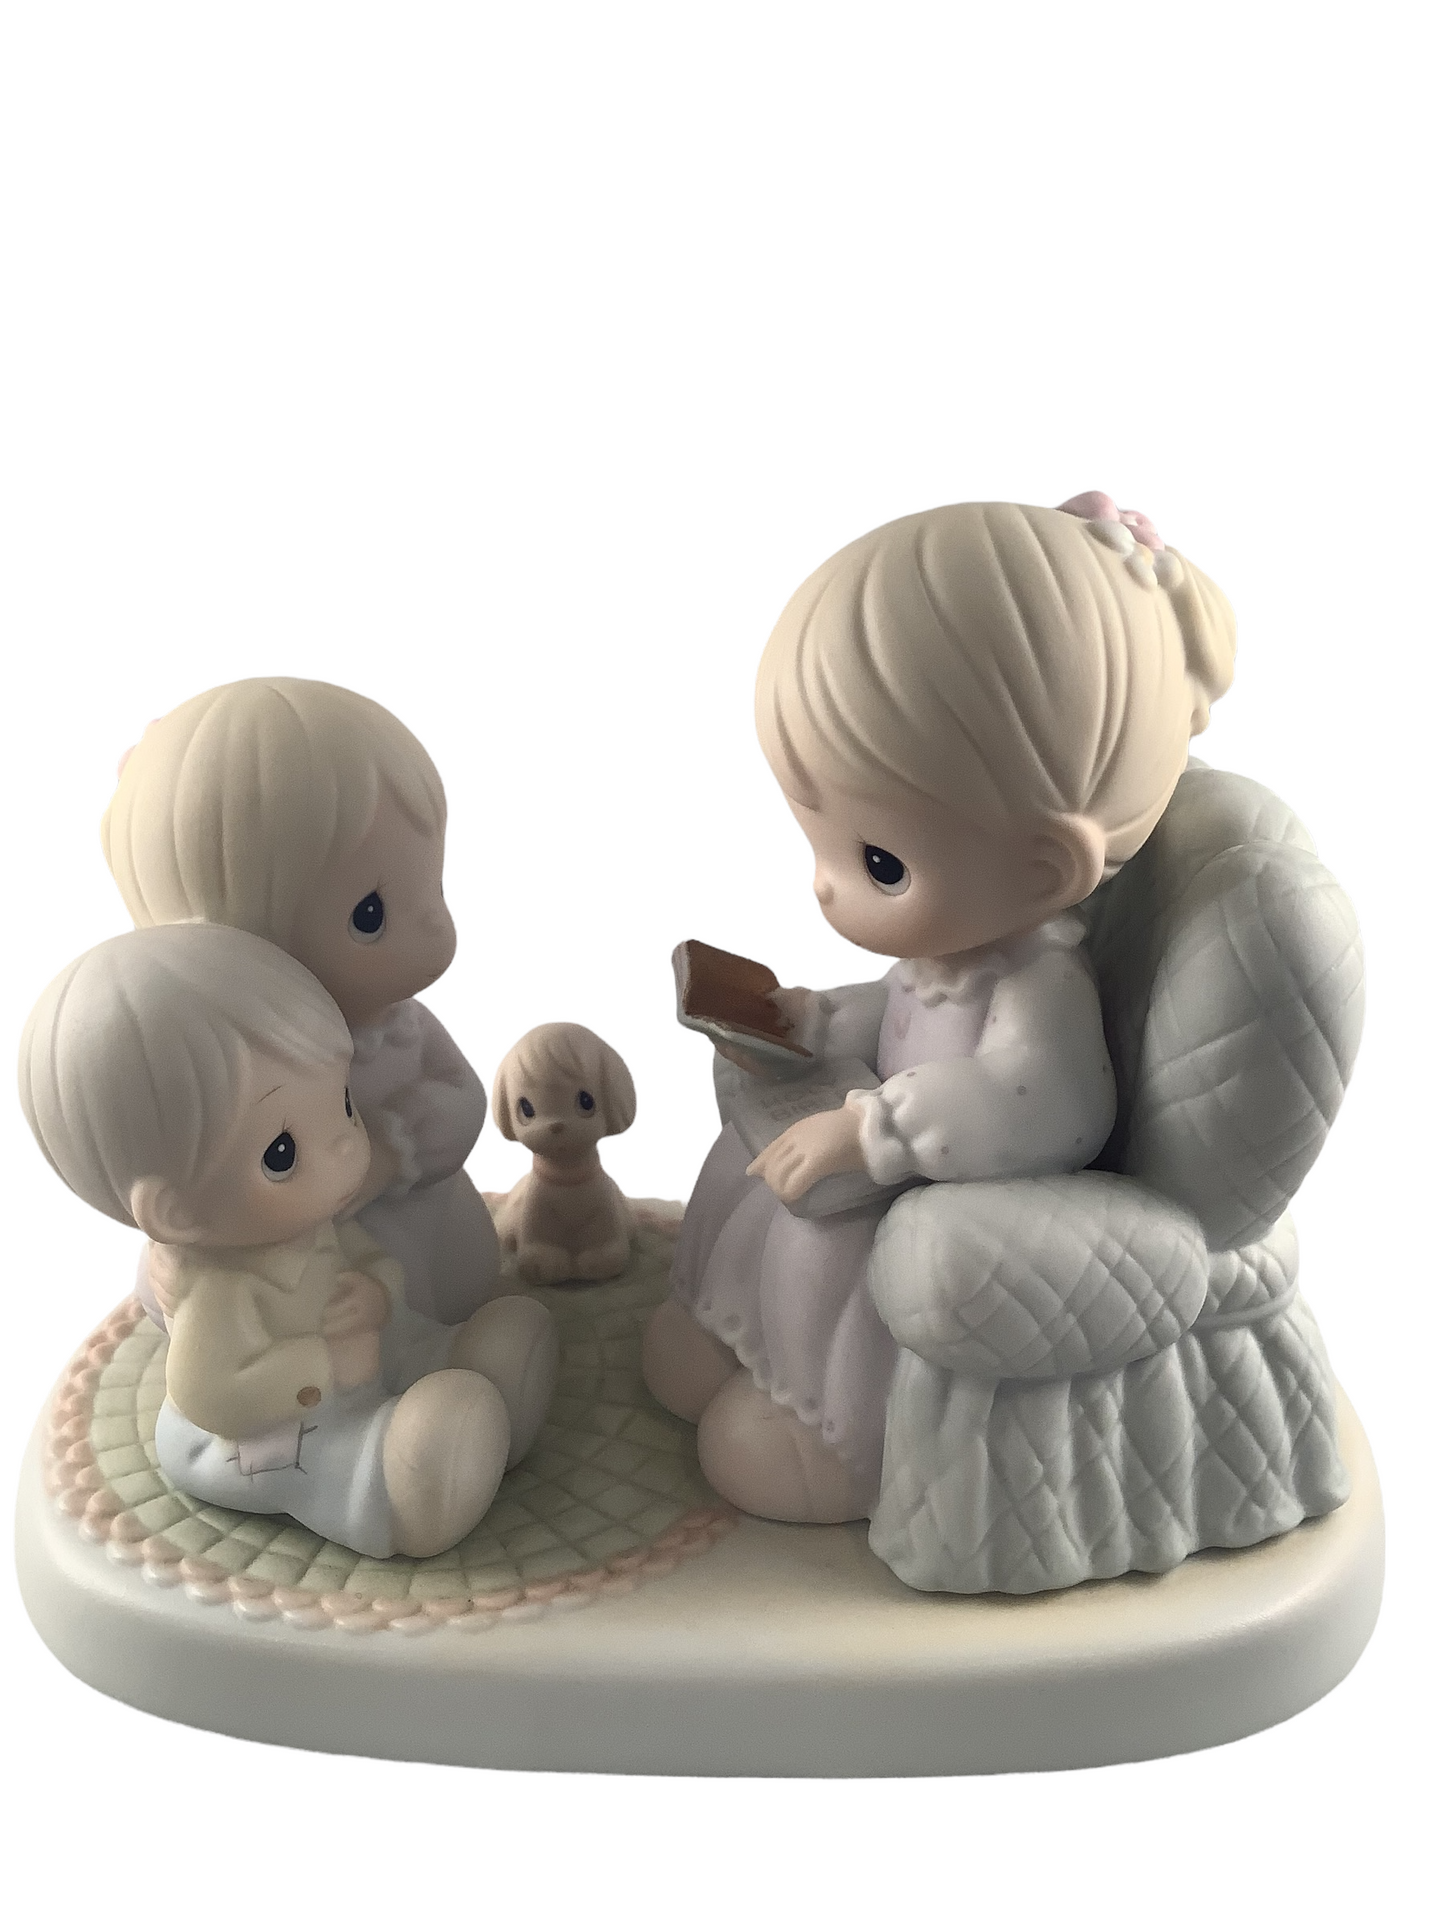 Bring The Little Ones To Jesus - Precious Moment Figurine